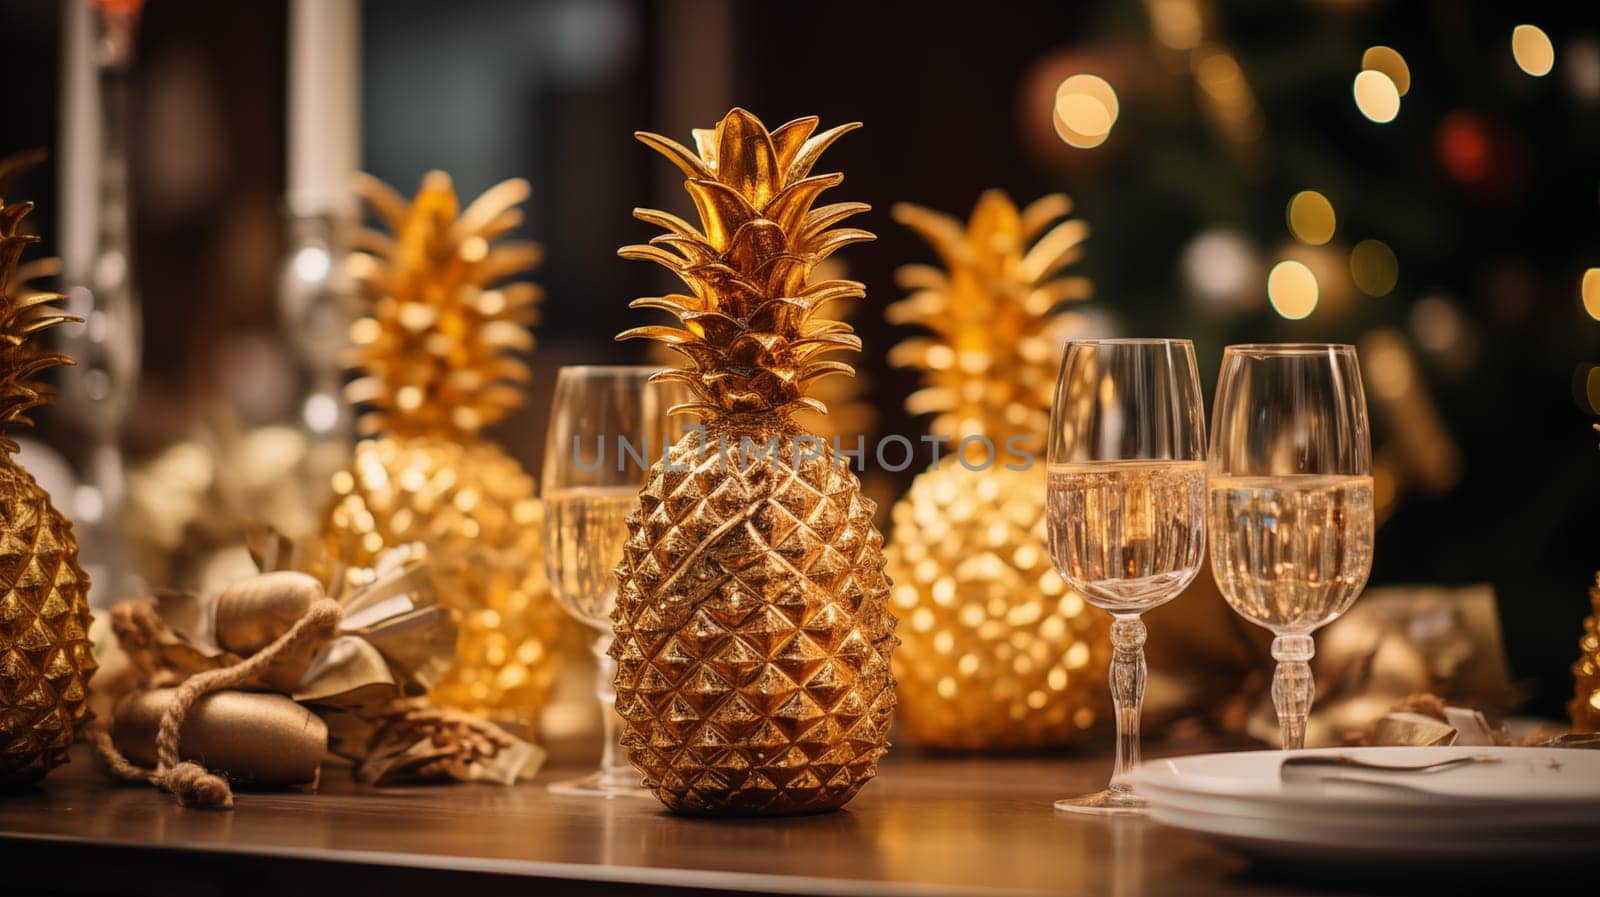 several golden pineapples and glasses of champagne, stand on plates on the table by Zakharova